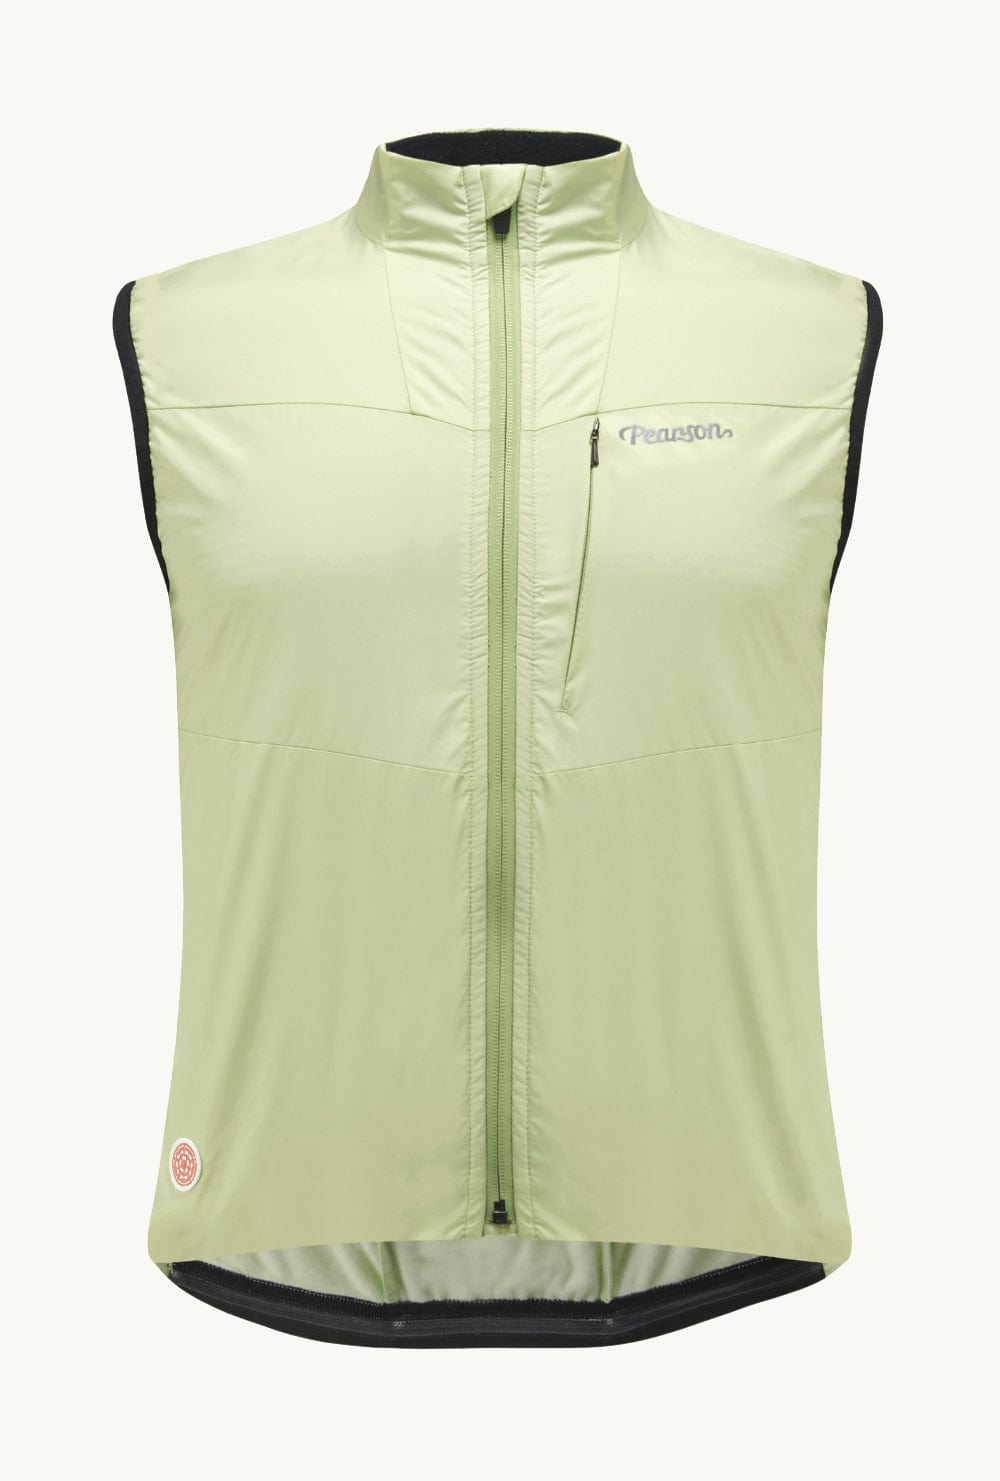 Pearson 1860  Feel The Benefits - Road Insulated Gilet Shadow Lime  X-large / Shadow Lime